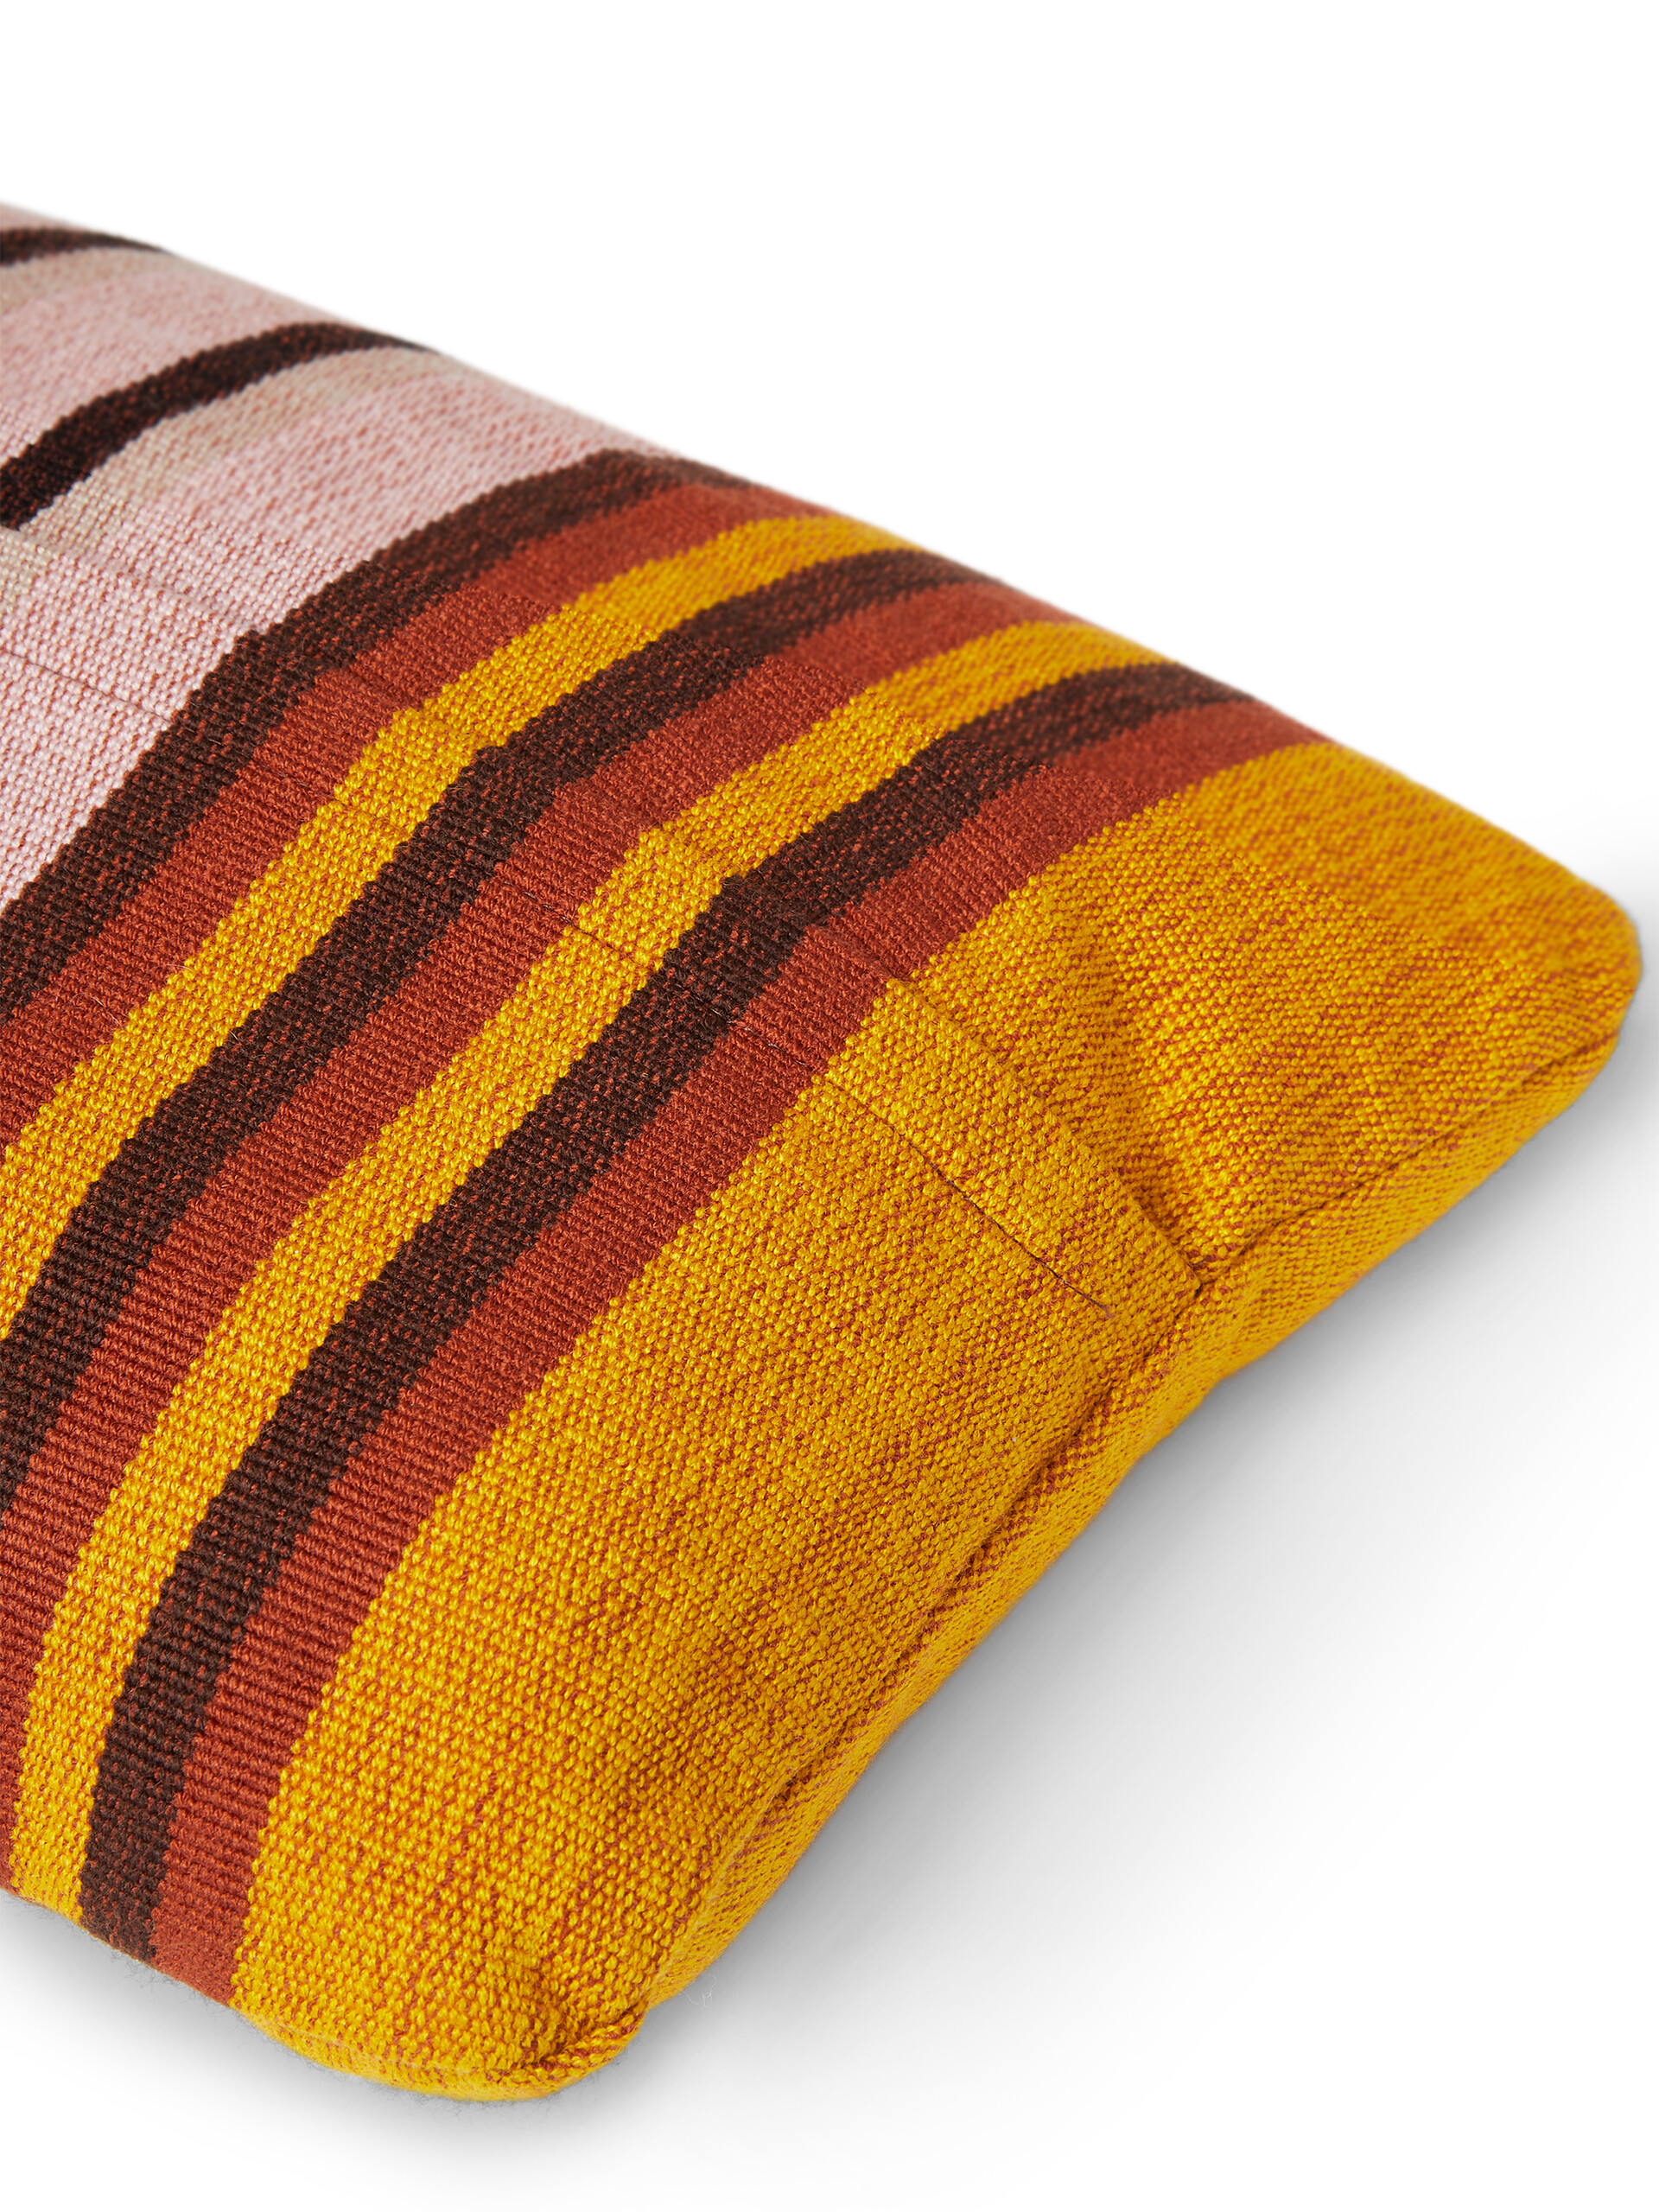 MARNI MARKET rectangular pillow cover in polyester with yellow pink and brown vertical stripes - Furniture - Image 3